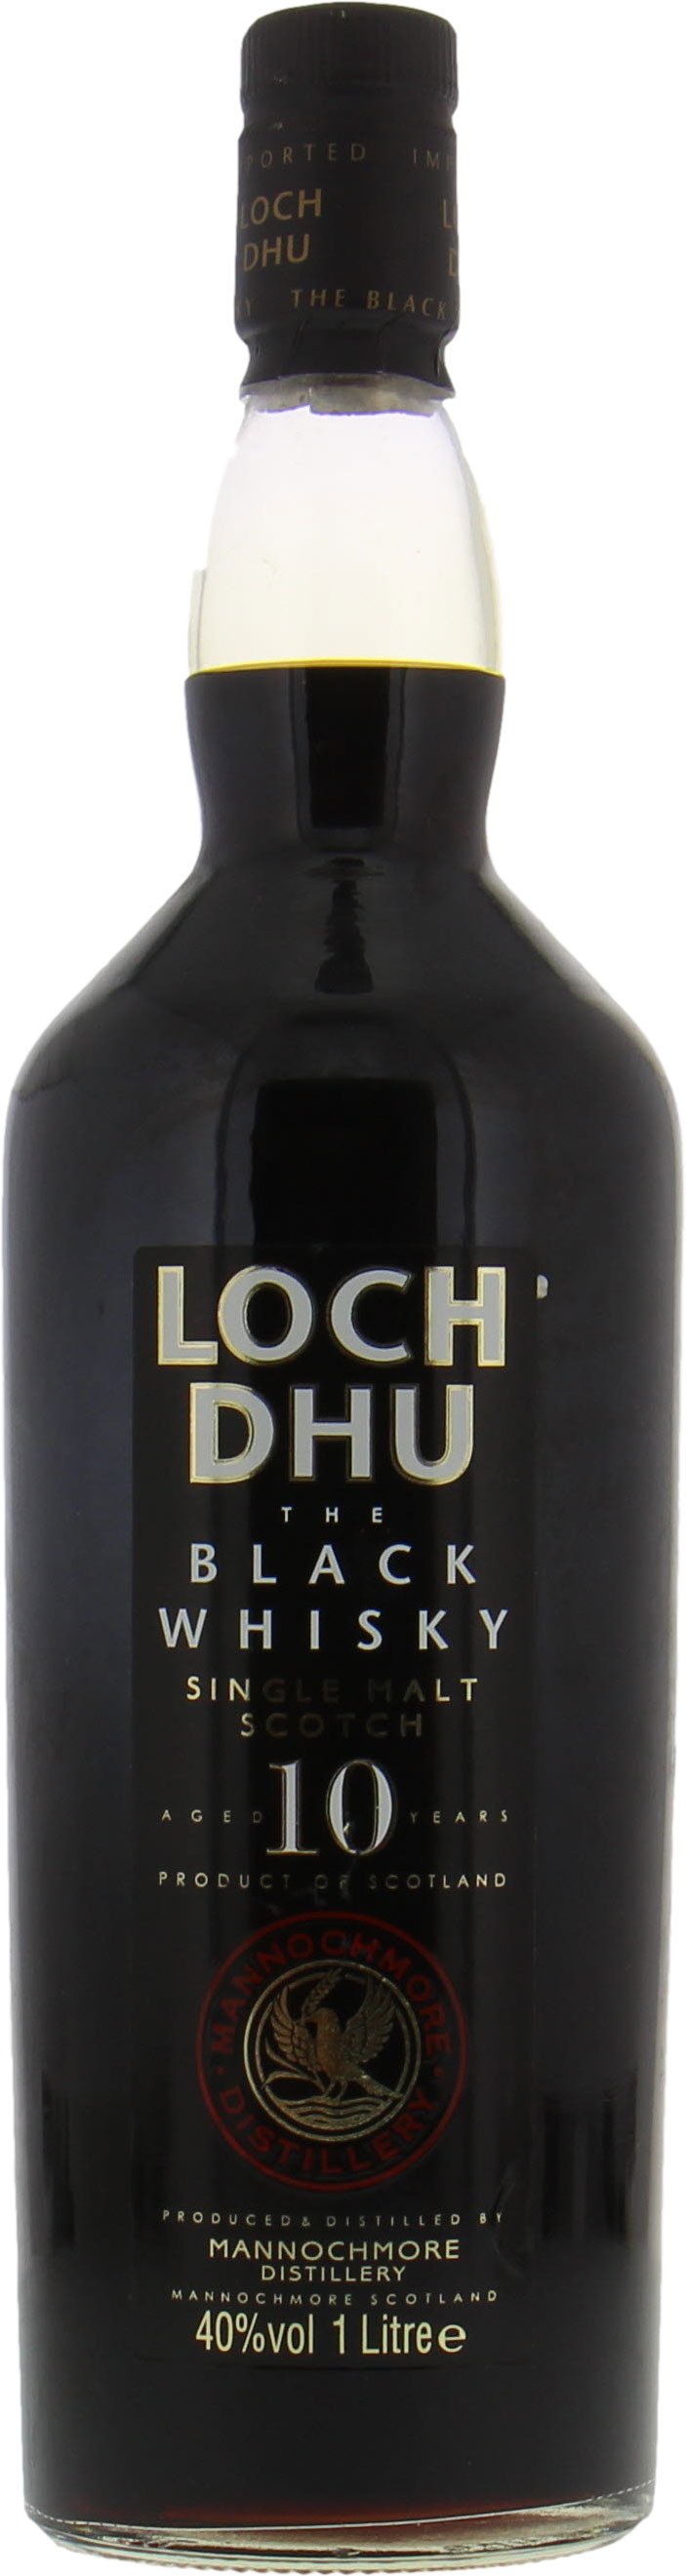 Mannochmore - Loch Dhu 10 Years Old Black Whisky 40% NV No Original Container Included!